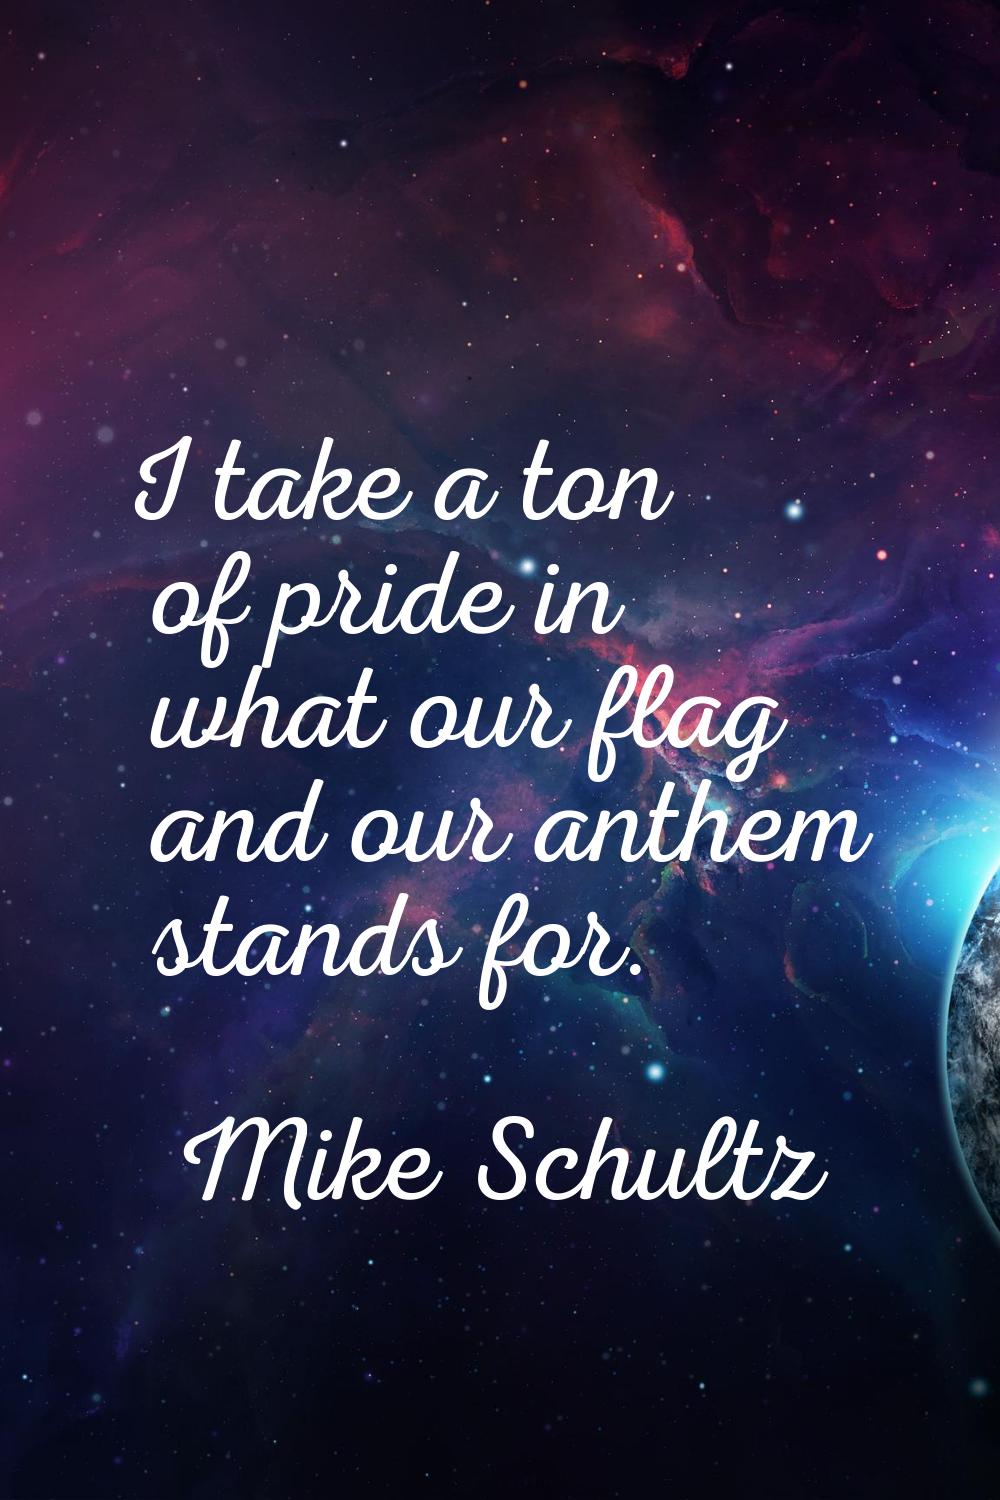 I take a ton of pride in what our flag and our anthem stands for.